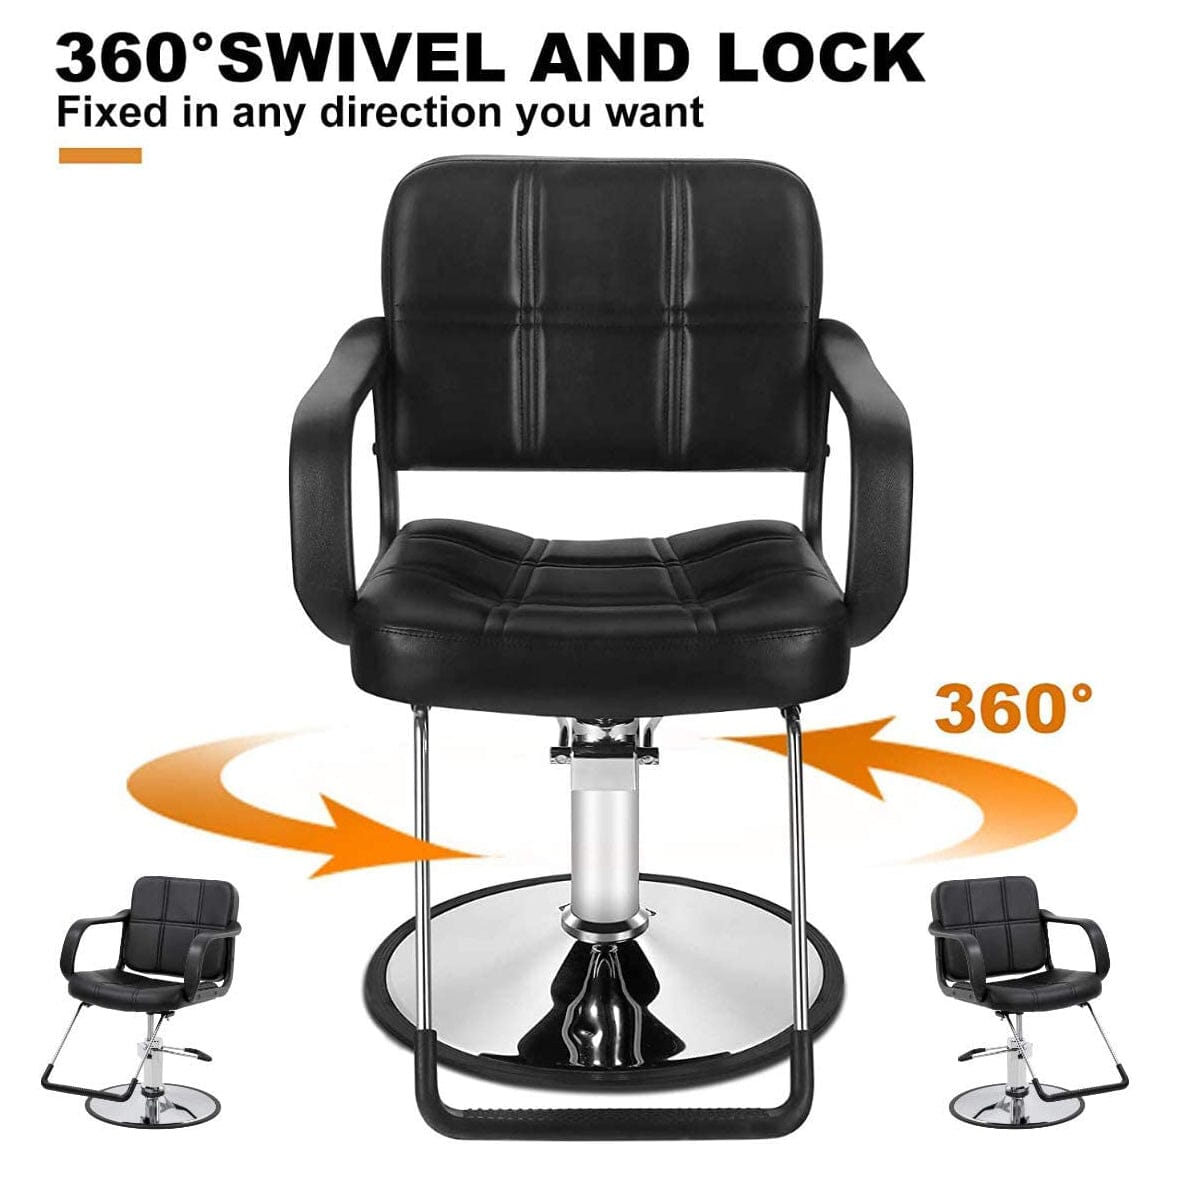 DK-68121 | Styling Chair Salon Chairs SSW 